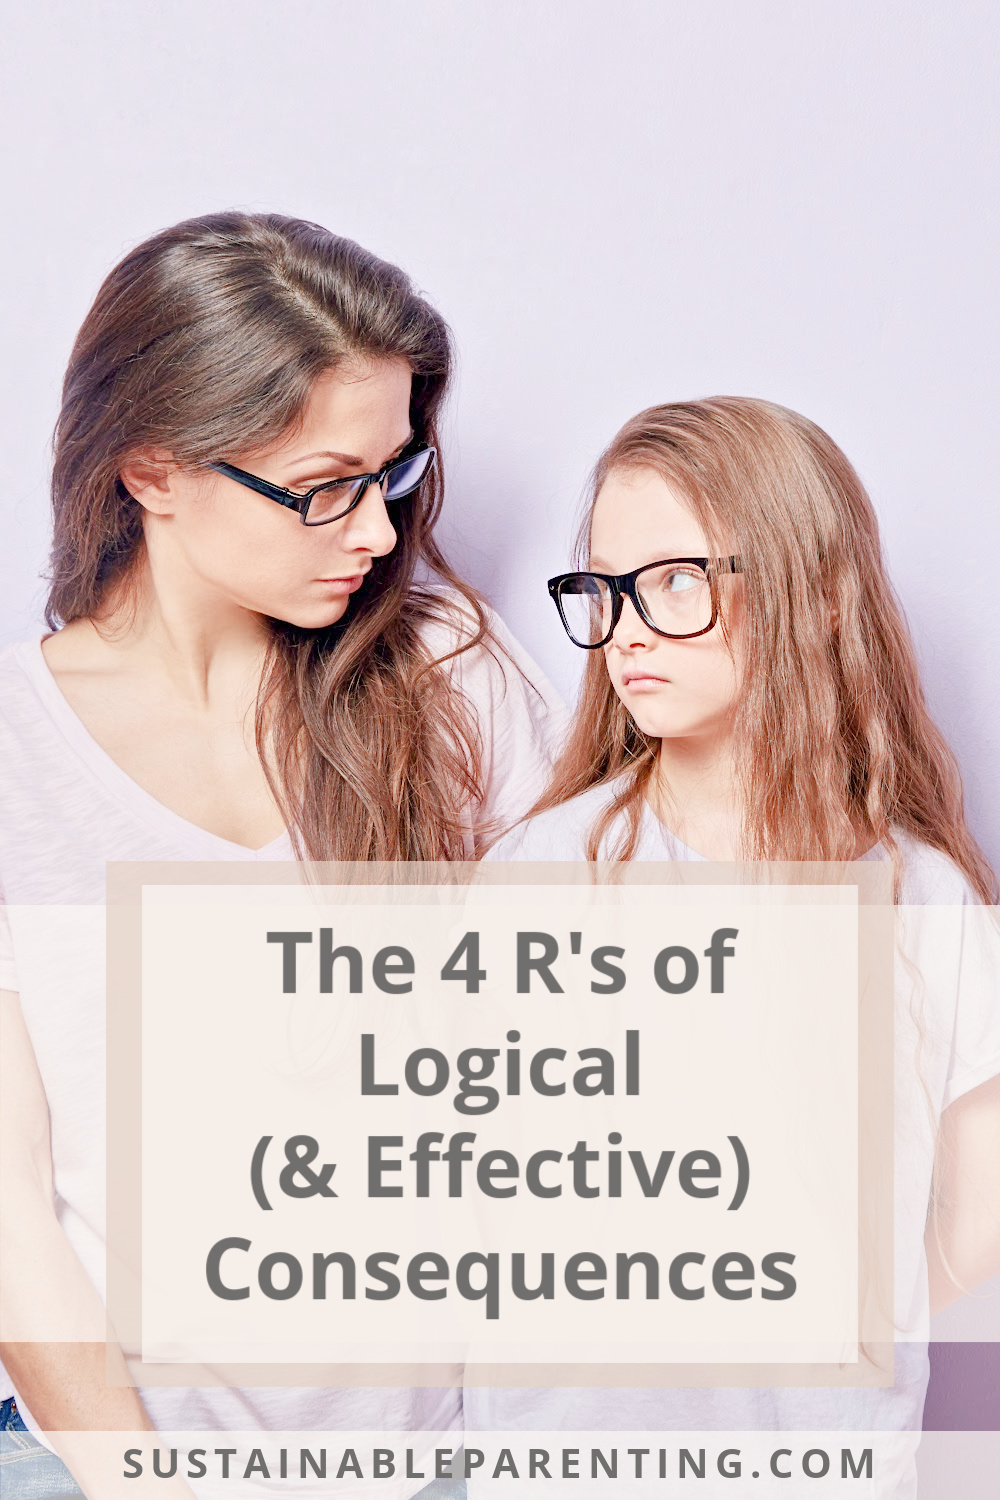 The 4 R’s of Logical (& Effective) Consequences